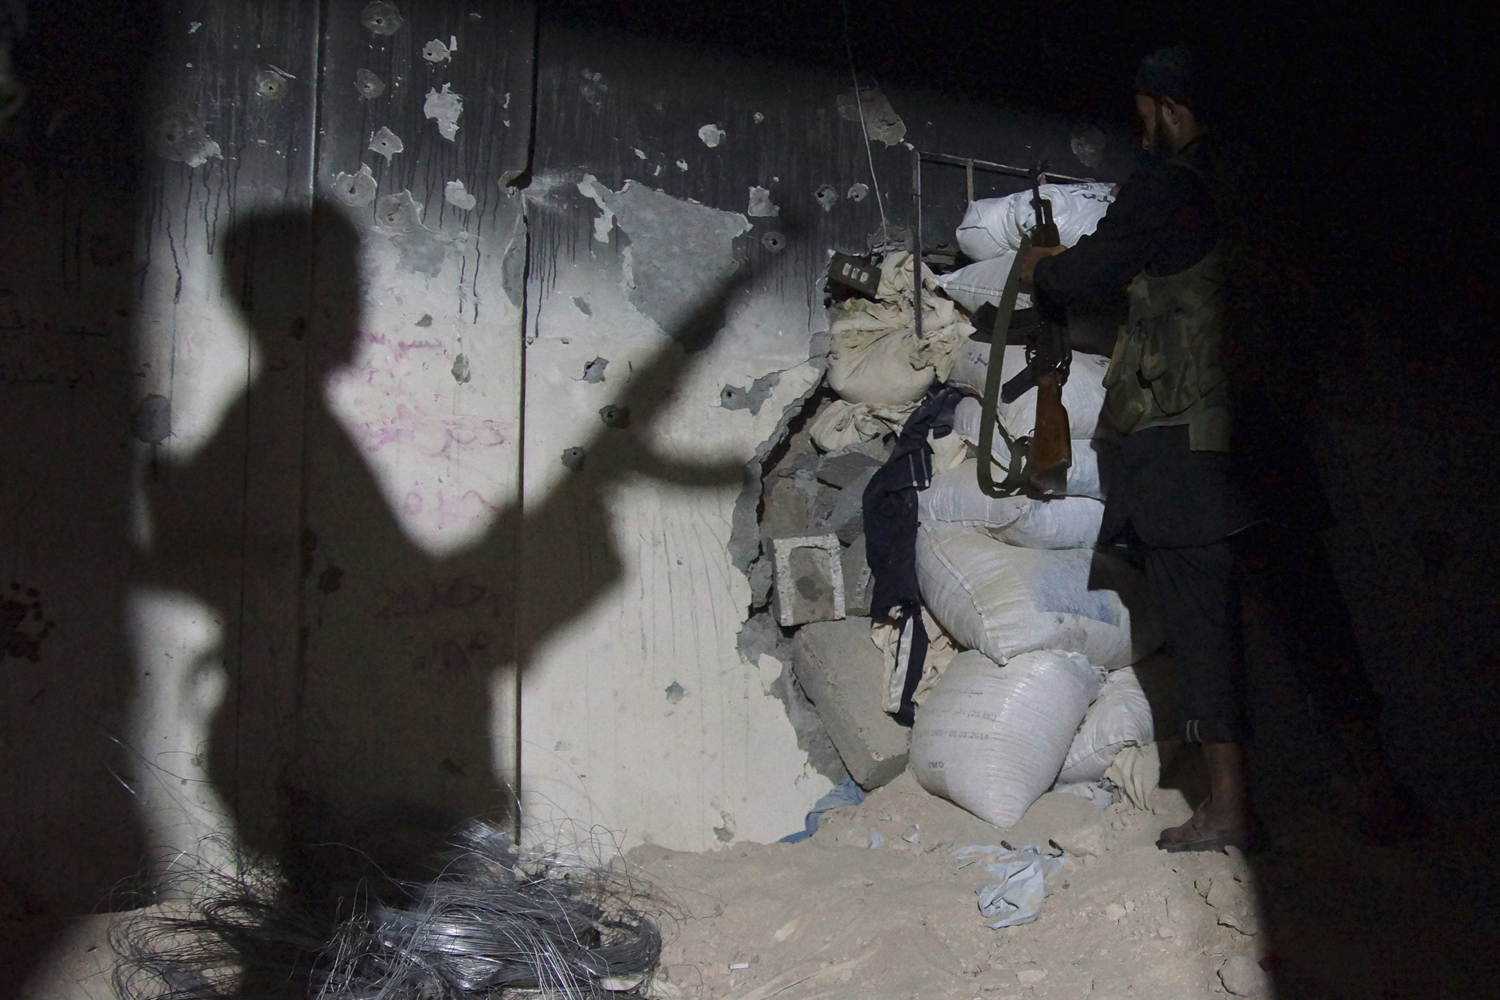 A Free Syrian Army fighter carries his weapon as he stands inside a room in Deir al-Zor